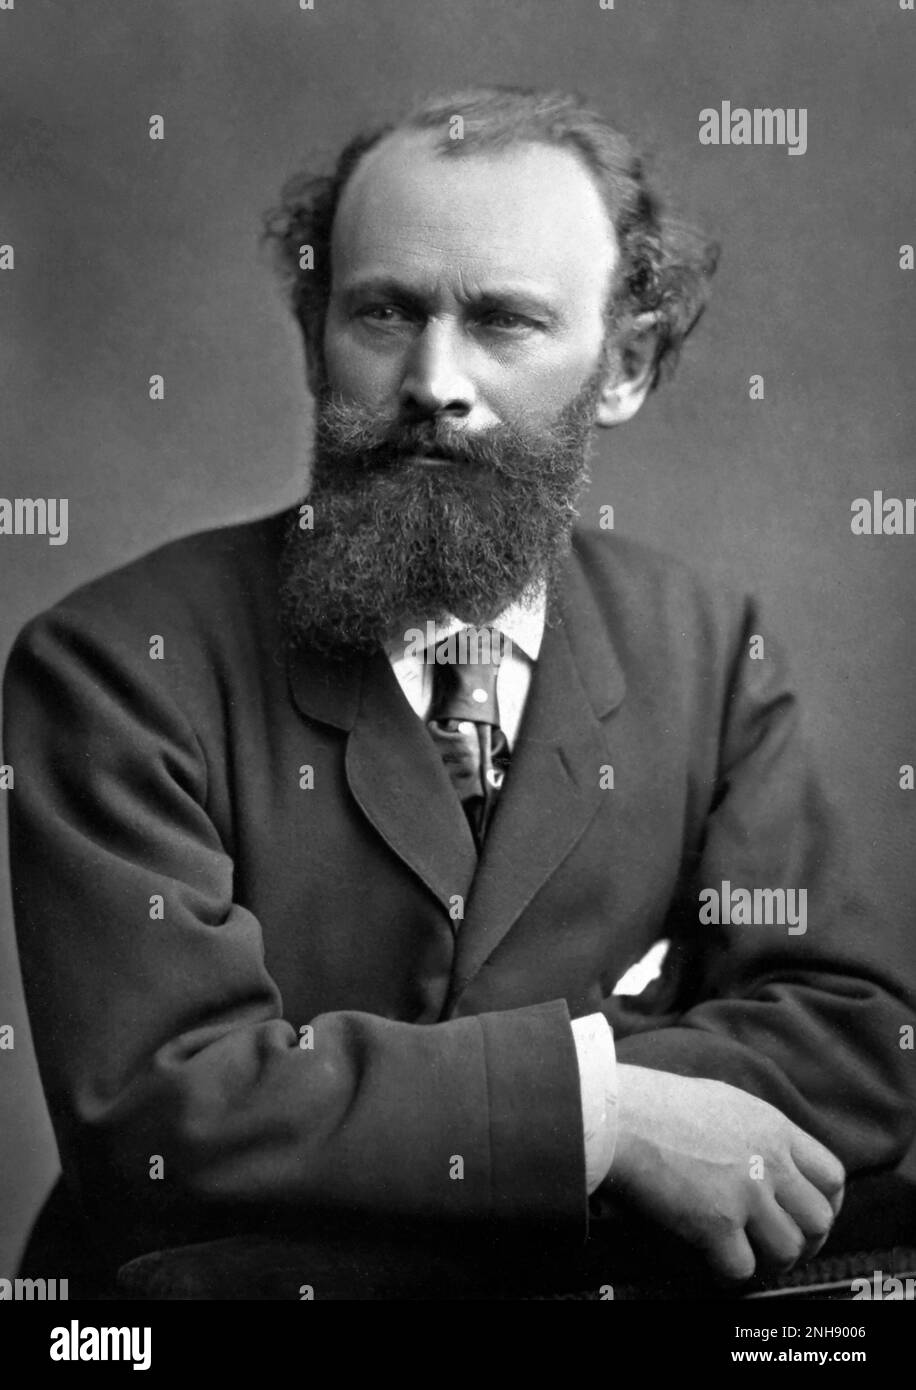 Edouard Manet (1832-1883), French modernist painter, photographed by Charles Reutlinger circa 1875. Stock Photo